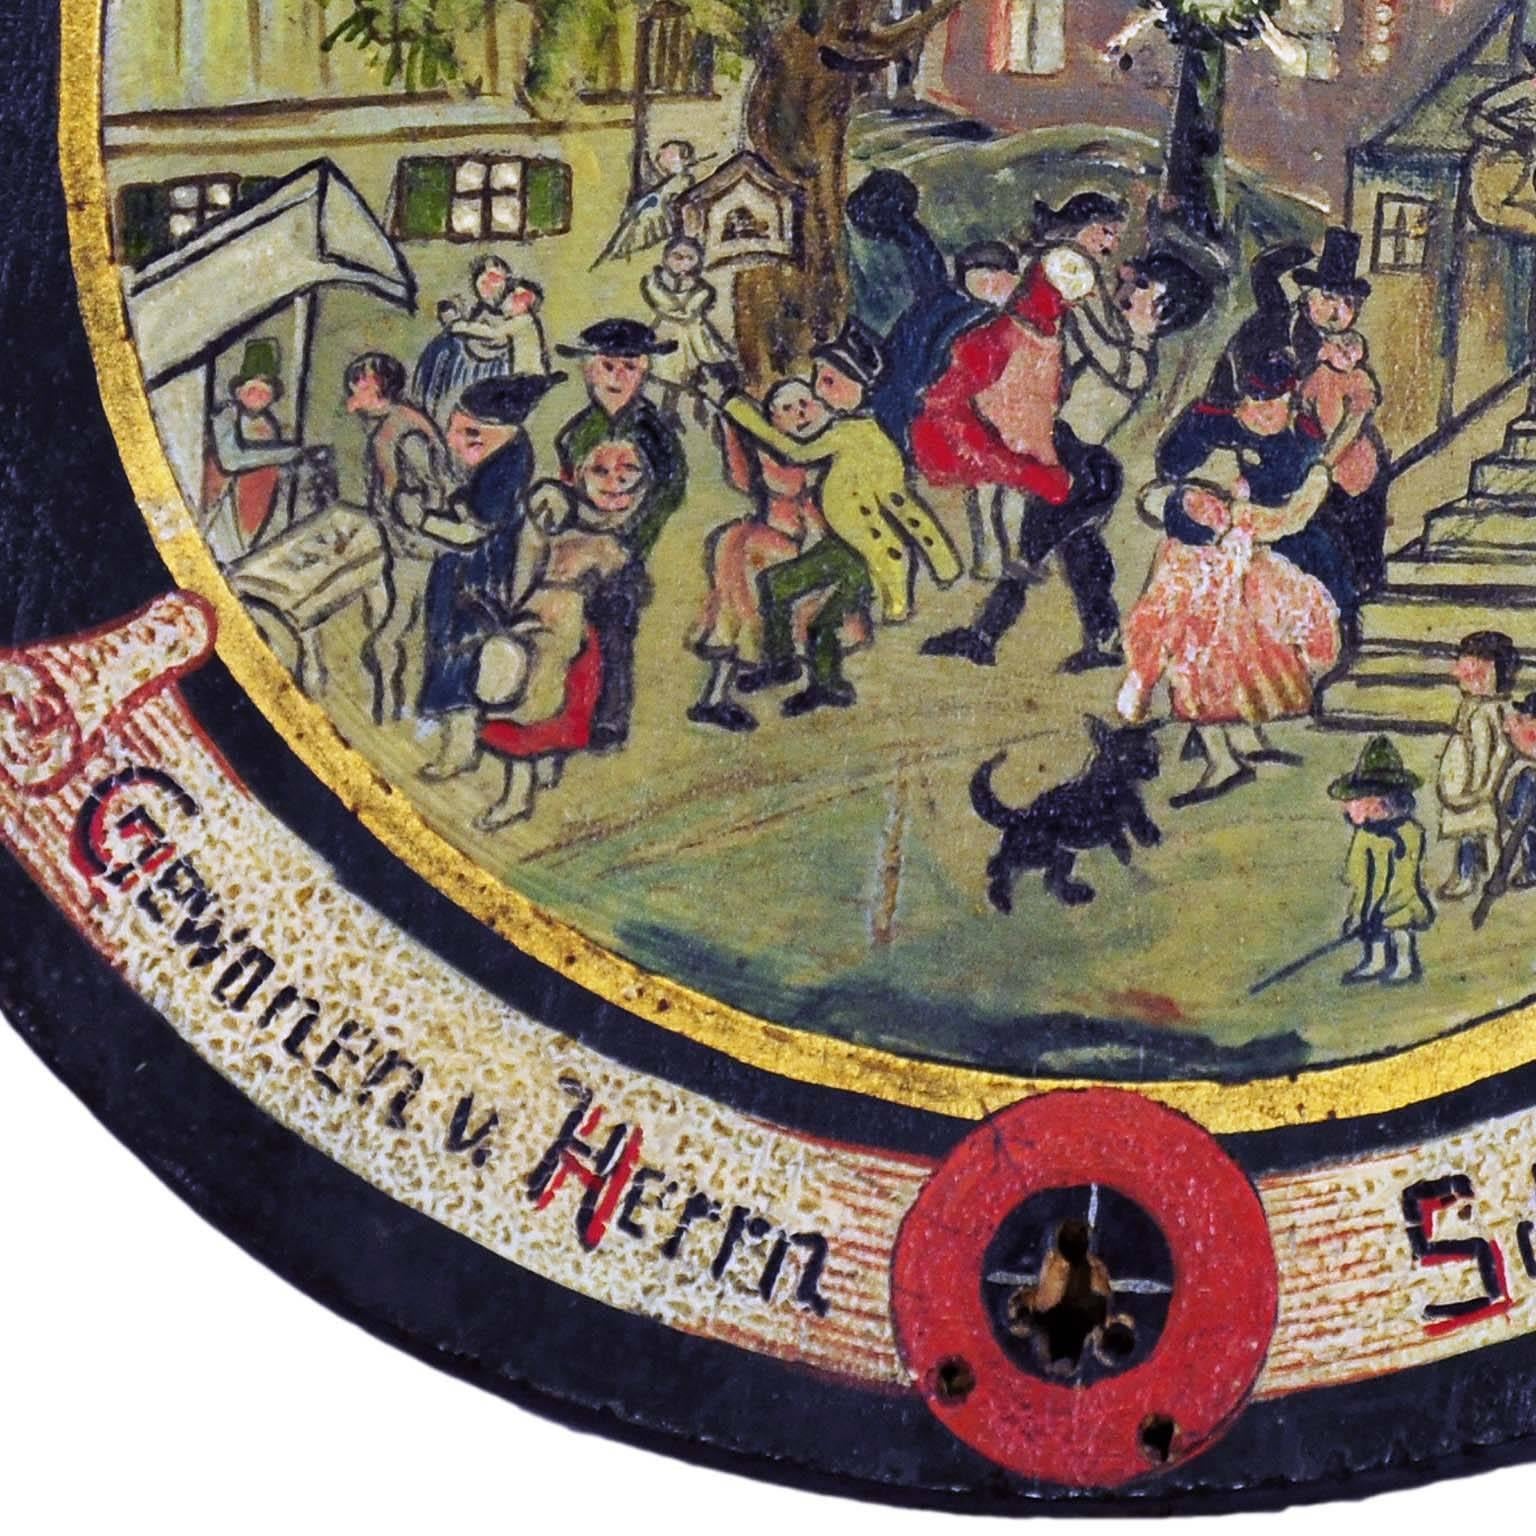 A rare hand-painted antique shooting target depicting a folksy village live scene. Oil on wood, hand-painted in naive painting style, Bavaria, circa 1920. On the base with impacts of the shooting, on the back handwritten list of the participants of